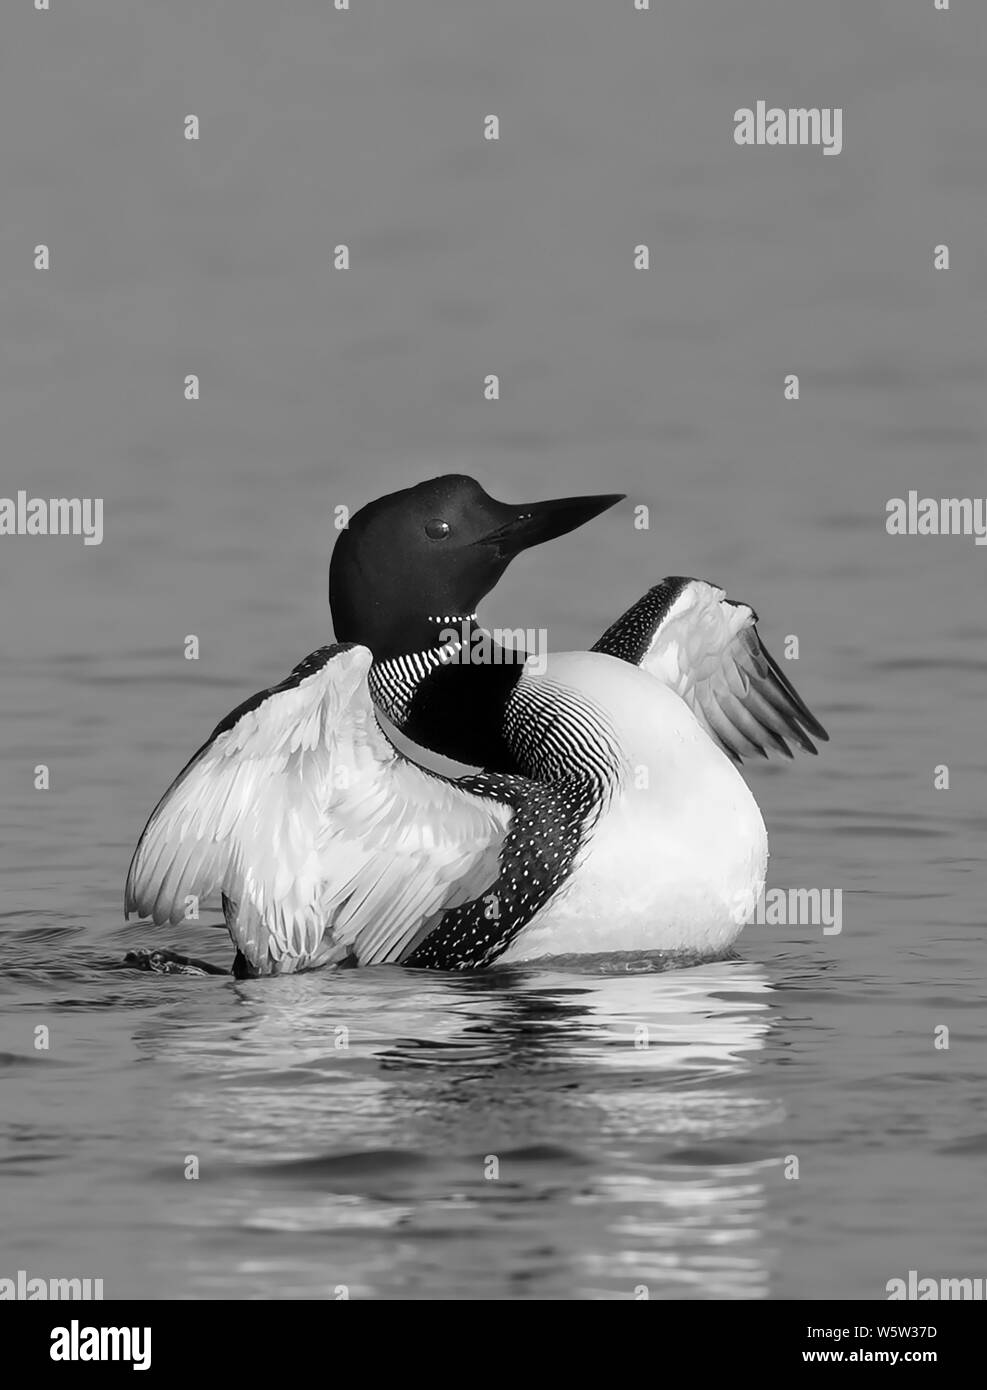 Common Loon (Gavia immer) in black and white flapping its wings in the morning on White Lake, Ontario, Canada Stock Photo